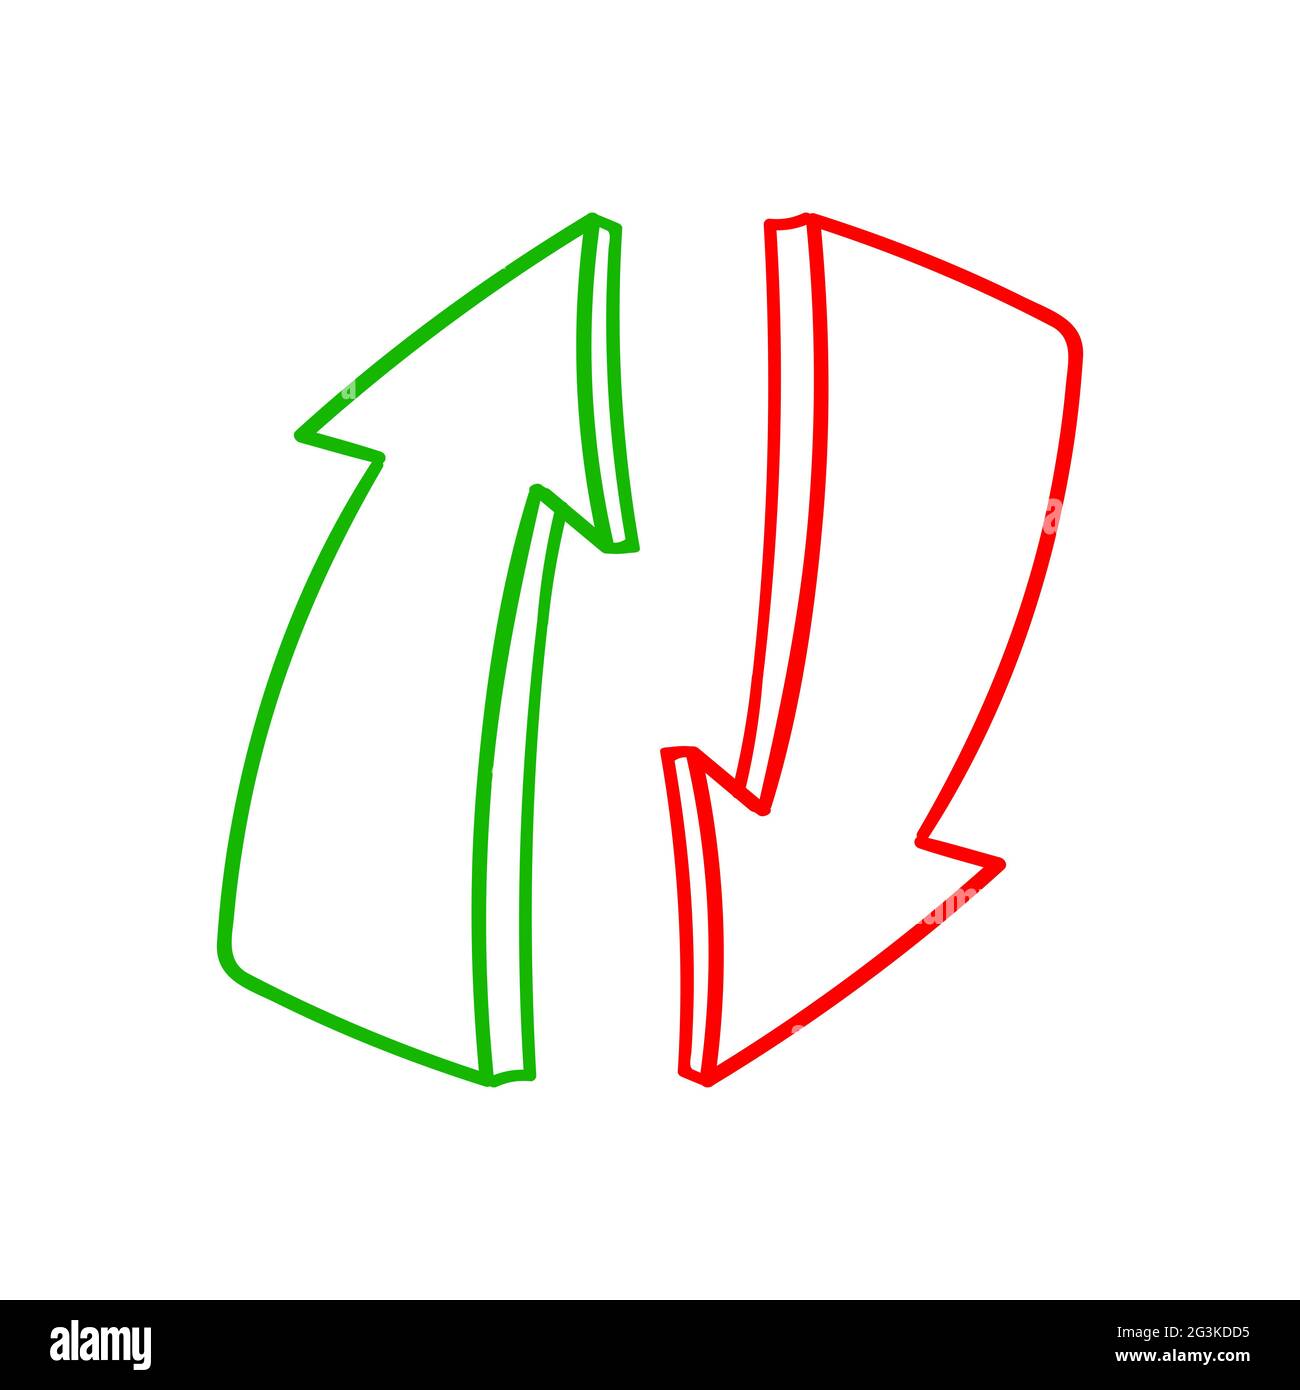 Illustration of green up and red down arrows Stock Photo